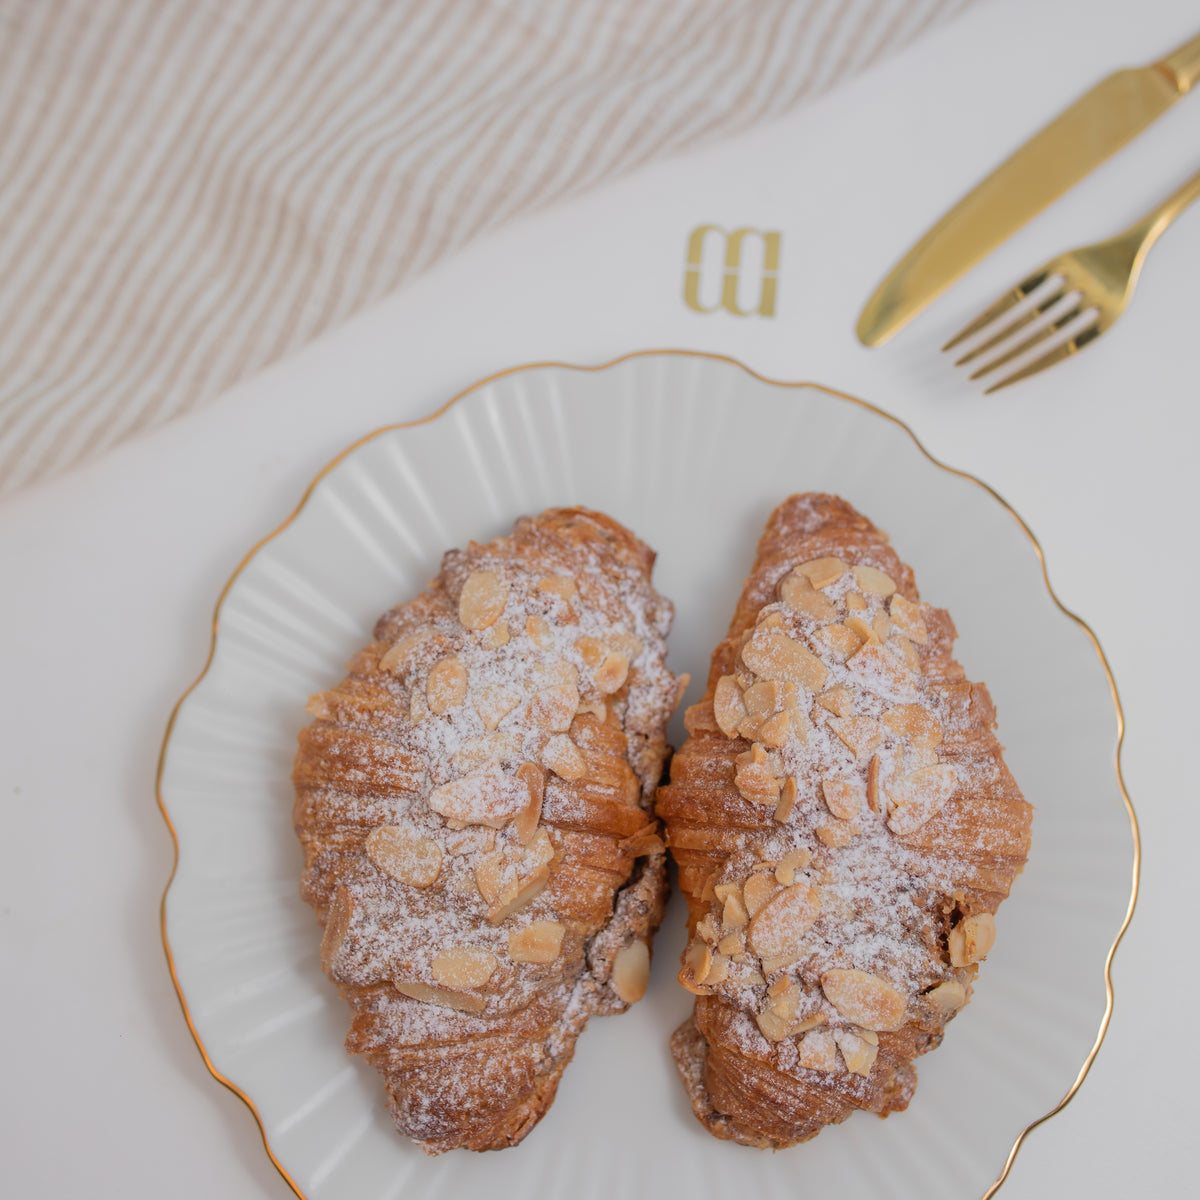 ALMOND CROISSANT (With Egg)